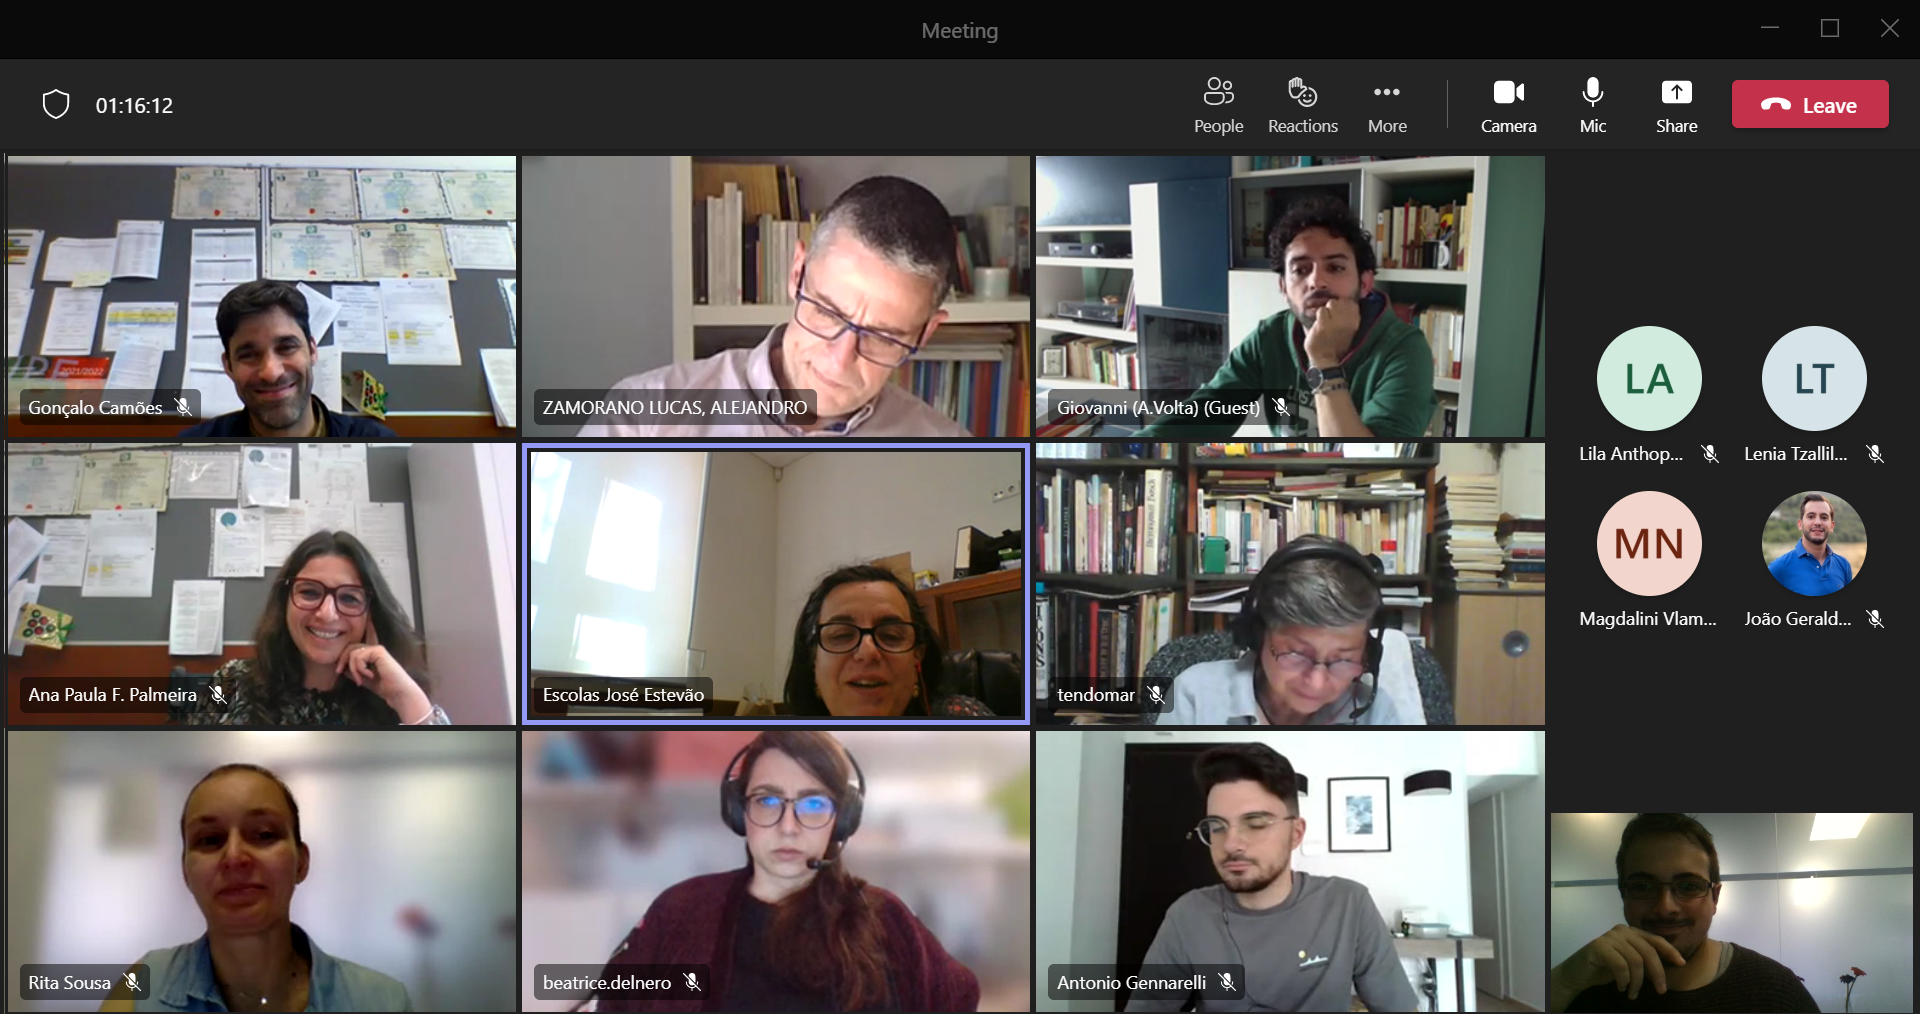 The image is a screenshot of an online meeting. Several people appear in the screen, that is divided allowing to see everyone at the same time.